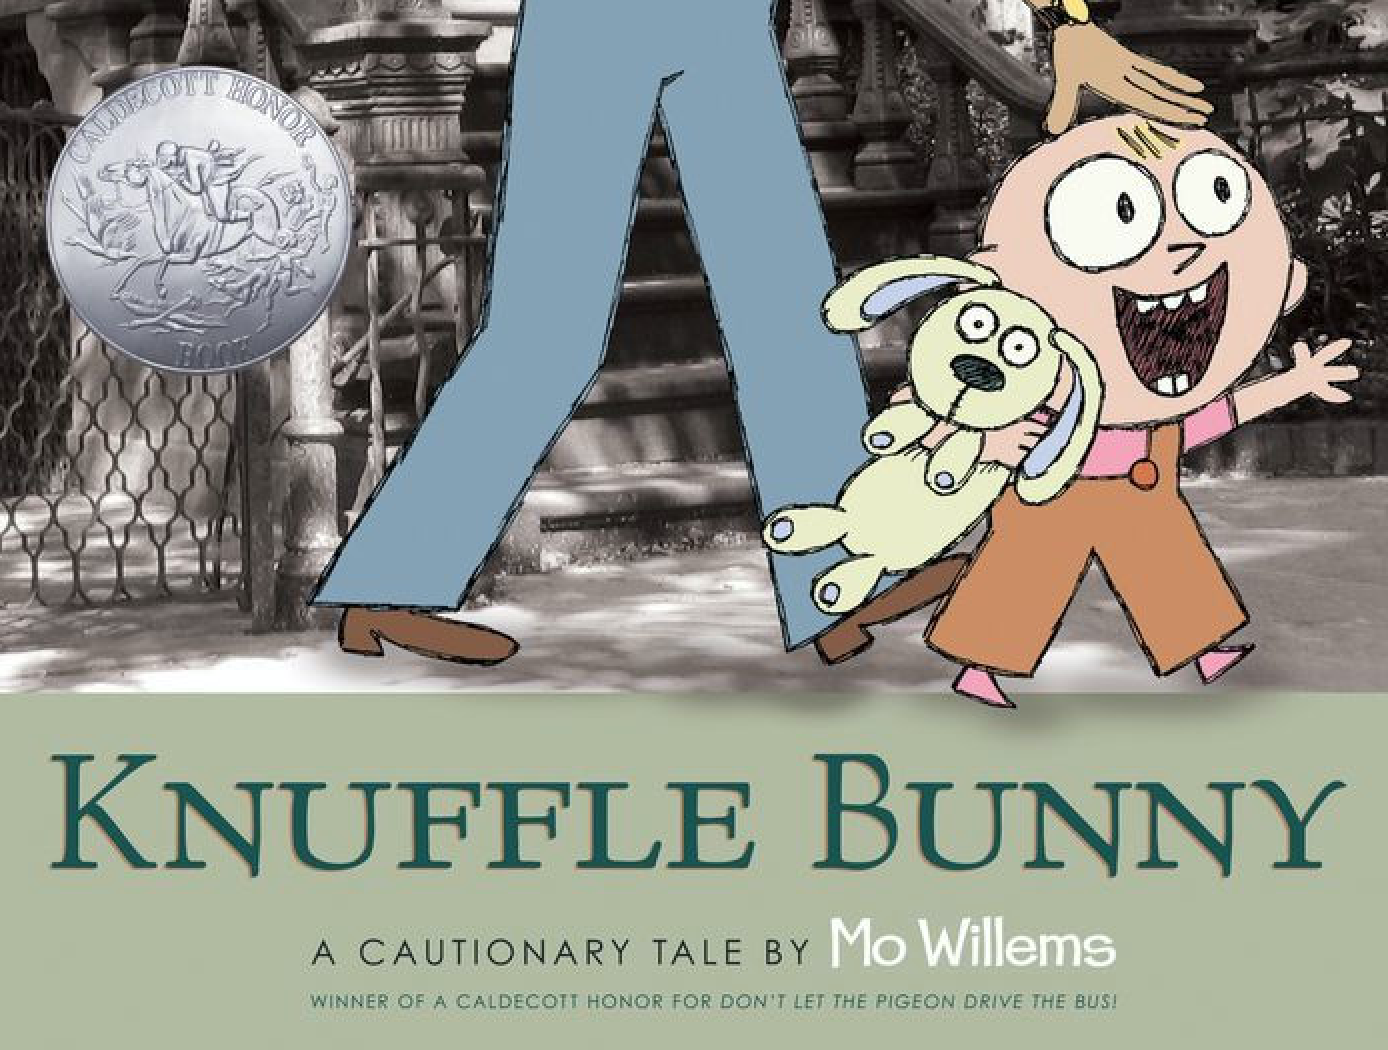 Illustrated book cover for Mo Willems' book Knuffle Bunny featuring an enthusiastic little girl holding her stuffed bunny. She is walking down the street with her father. Only his legs are visible.